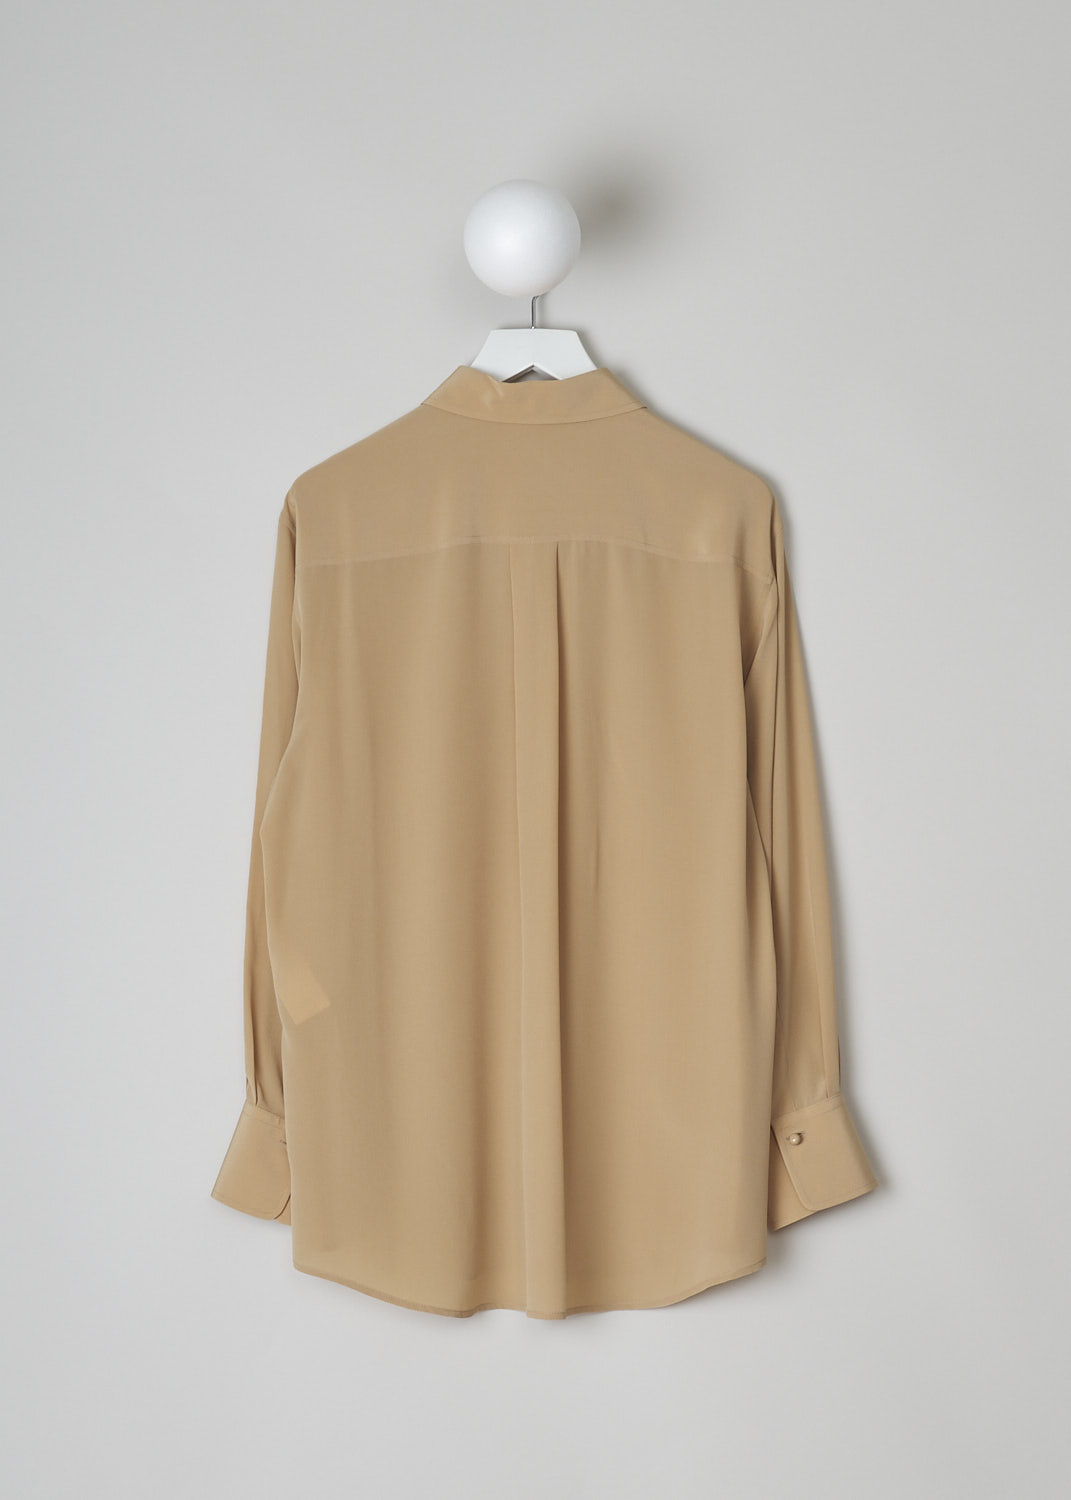 CHLOÉ, PEARL BEIGE BLOUSE, CHC22UHT05004278, Beige, Back, This silk pearl beige blouse has a classic collar and a button placket with round ceramic. The blouse has long sleeves with buttoned cuffs.  A centre box pleat runs vertically down the back.
